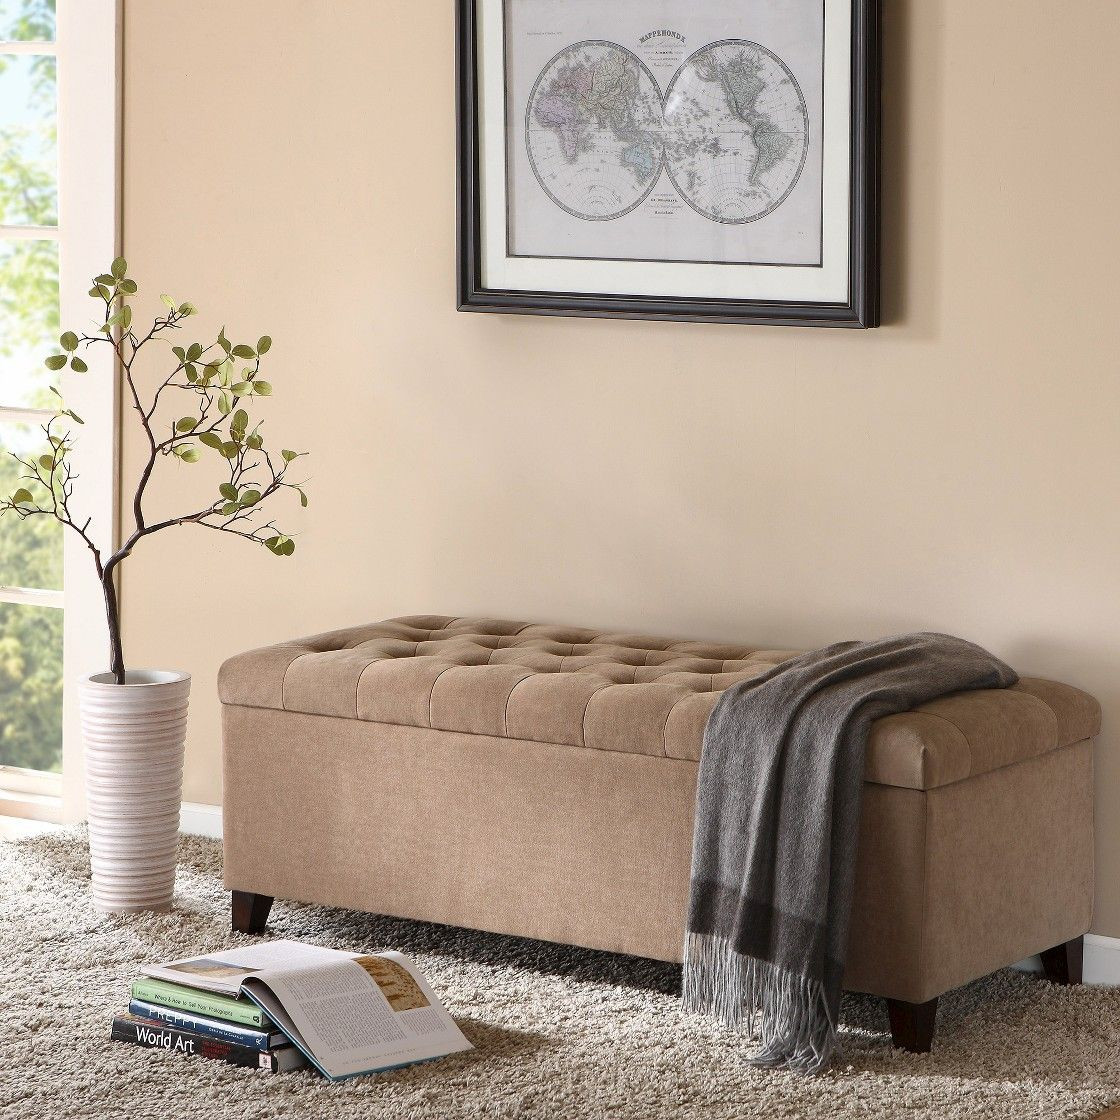 Tufted Storage Bench Target
 Shandra Bench Storage Ottoman with Tufted Top Sand